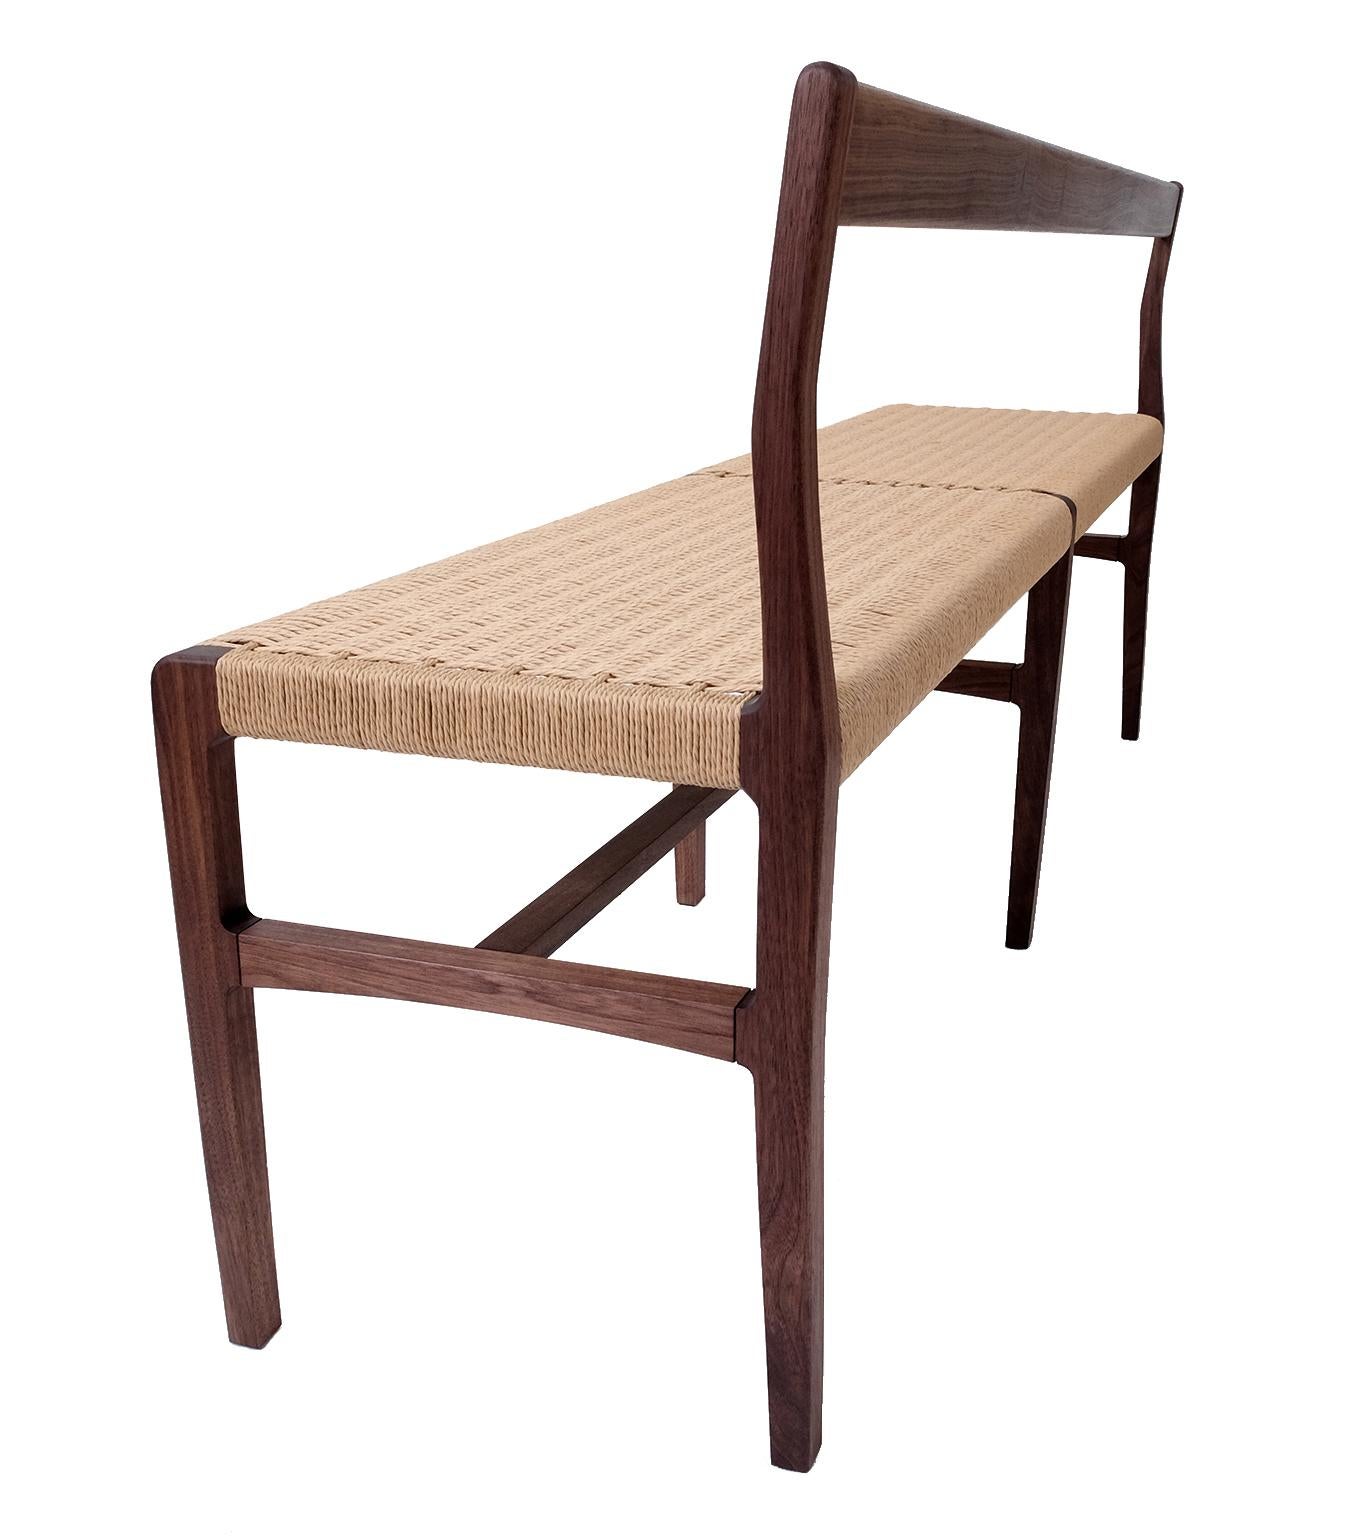 Giacomo Bench with Back, extra-long in Walnut with Danish Cord Seat (Moderne der Mitte des Jahrhunderts) im Angebot